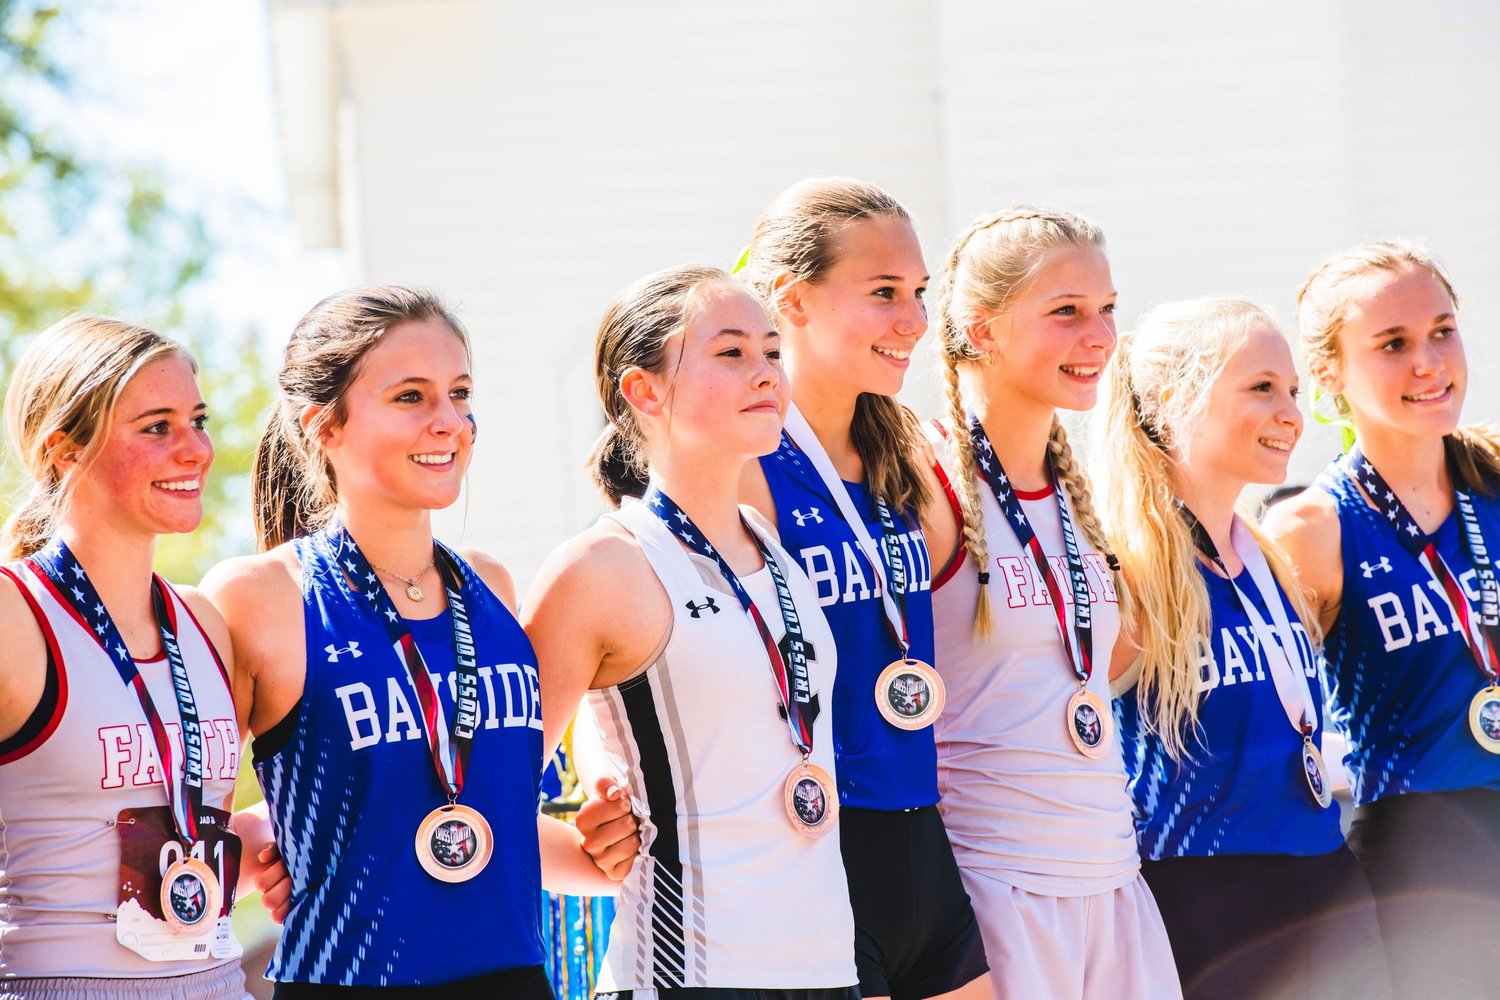 Elberta’s Aubrey Faino (third from left) finished fifth at the Class 5A Section 1 Championship meet in Bay Minette and joined Bayside Academy’s Catherine Doyle, Annie Midyett, Shelby Fargason, Presley Putnam, Amelia Wells and Grace Dawson in the top 10 to advance to the state championship meet this Saturday. Baldwin County runners will take up 7.51% of the state field.